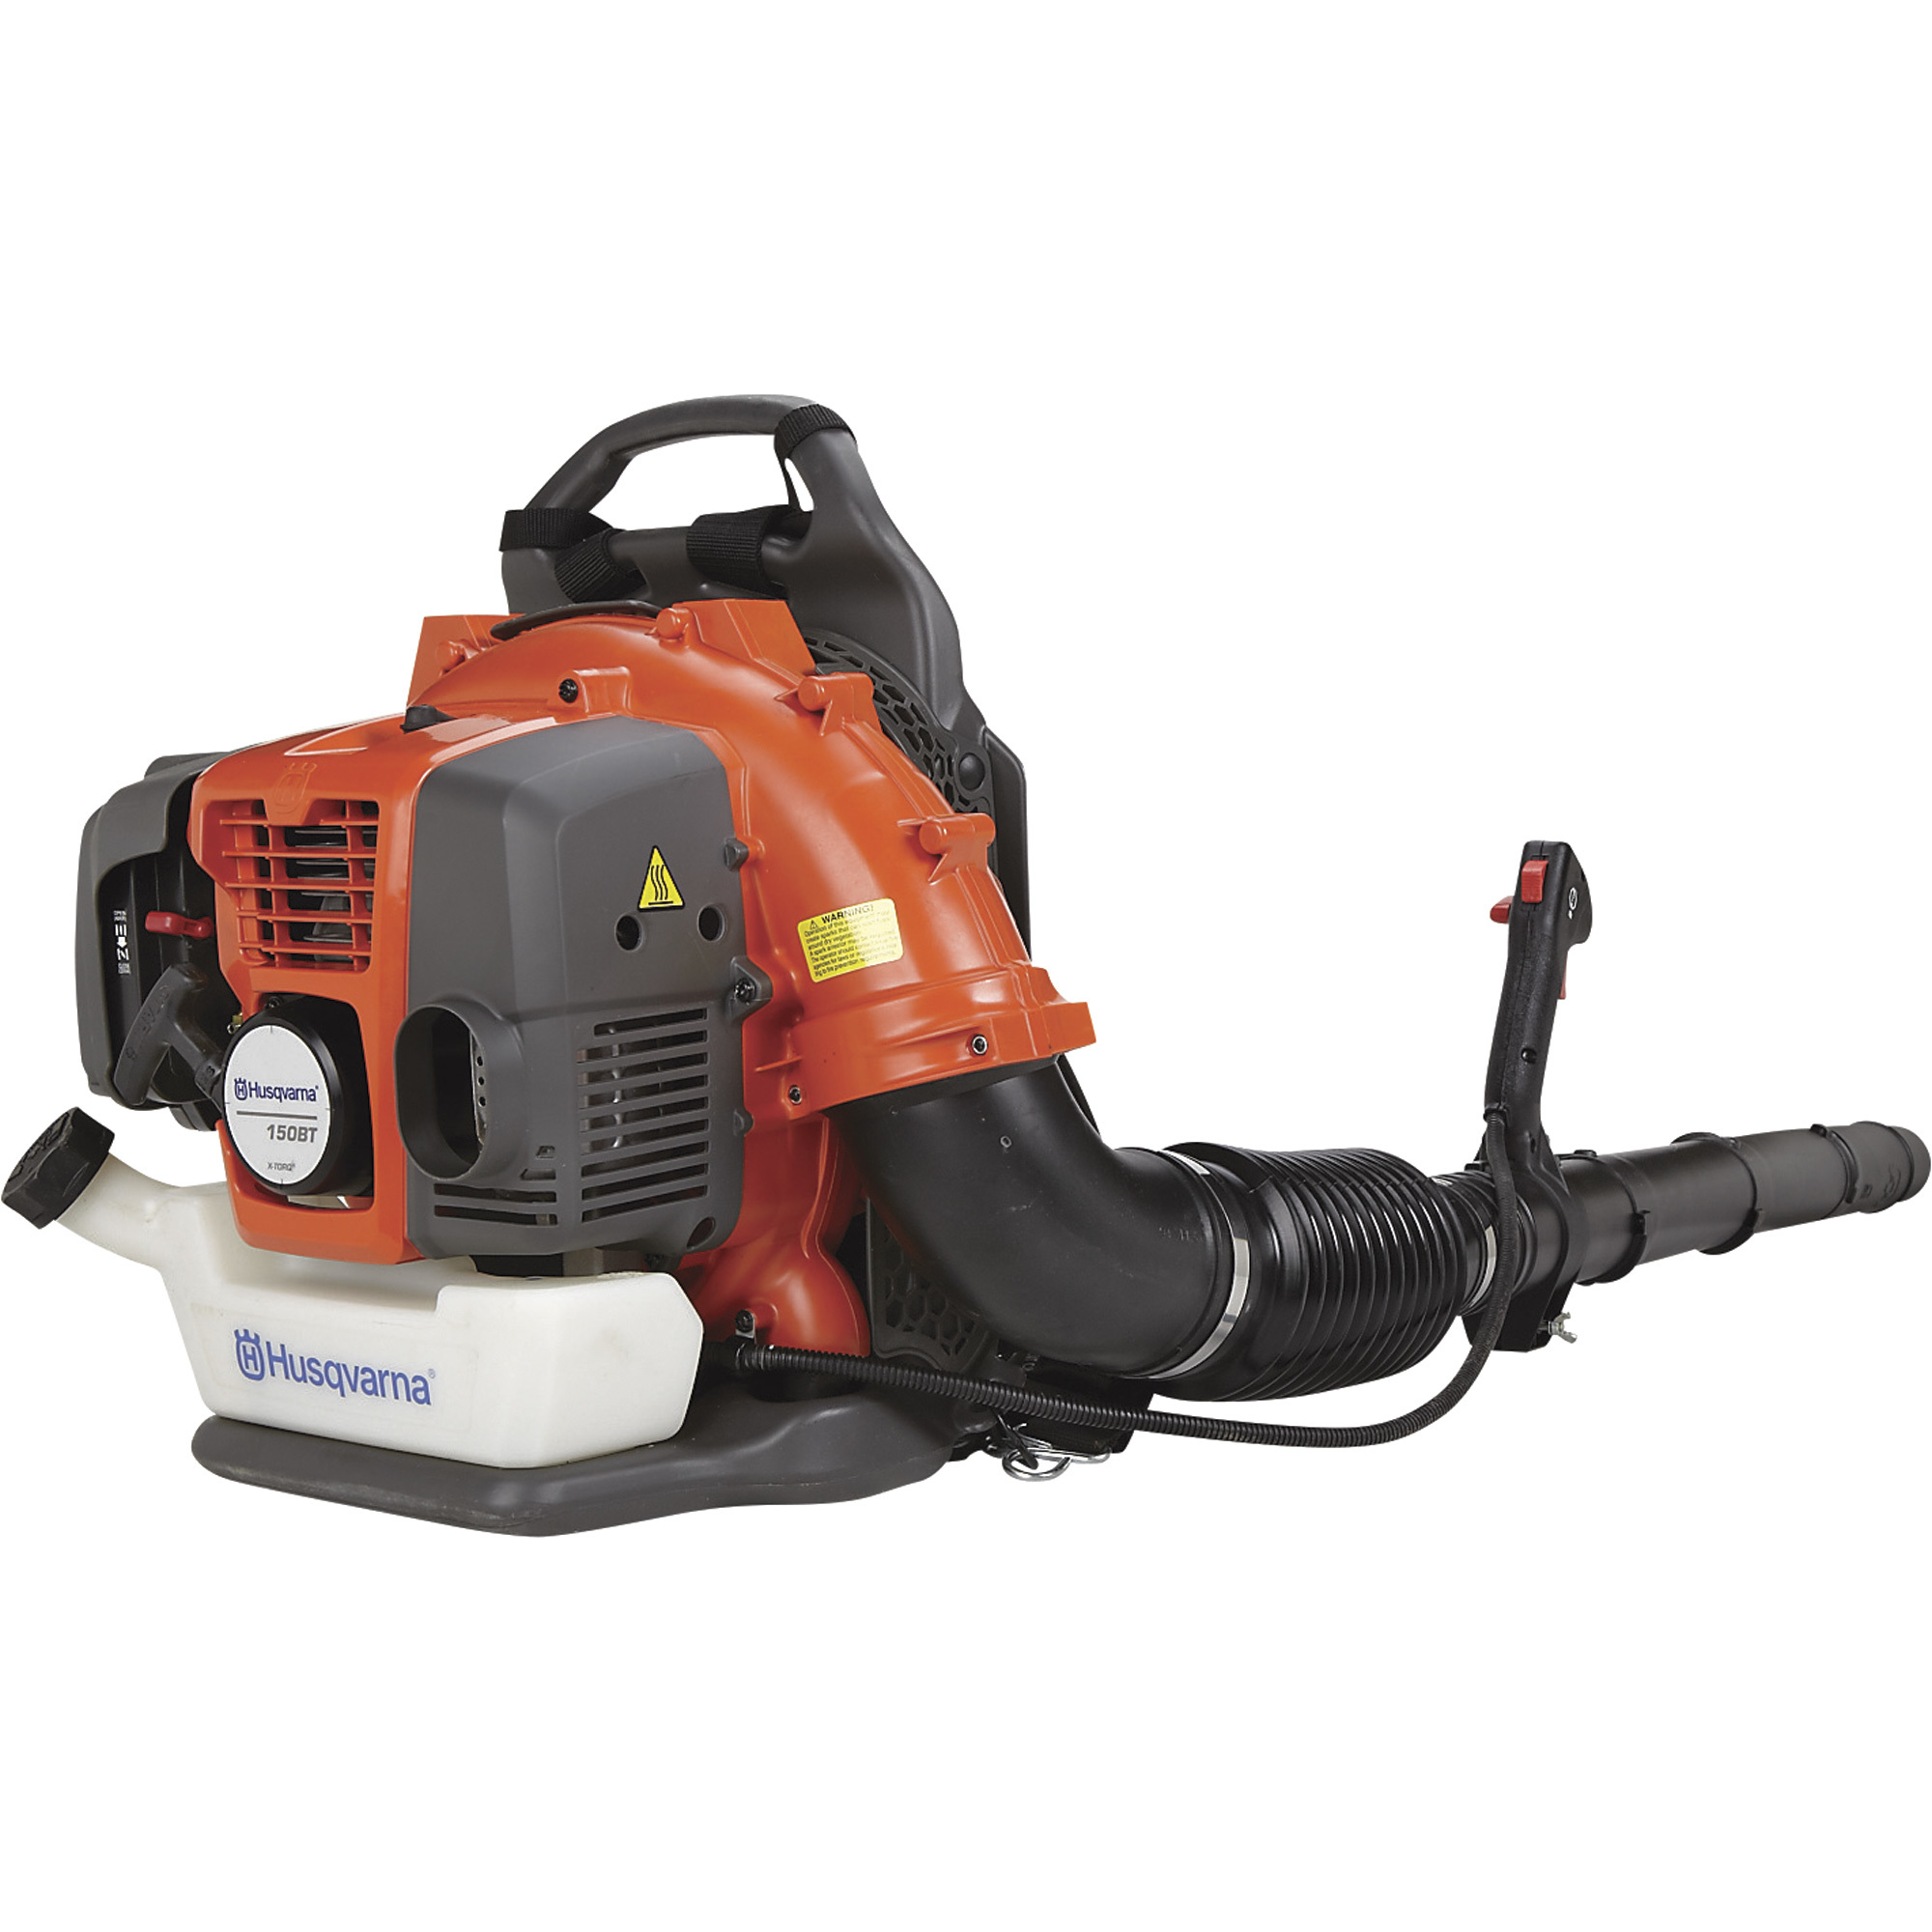 Husqvarna Reconditioned 50.2cc, 434 CFM CARB/EPA-Approved Backpack Blower - Model# 150BTA